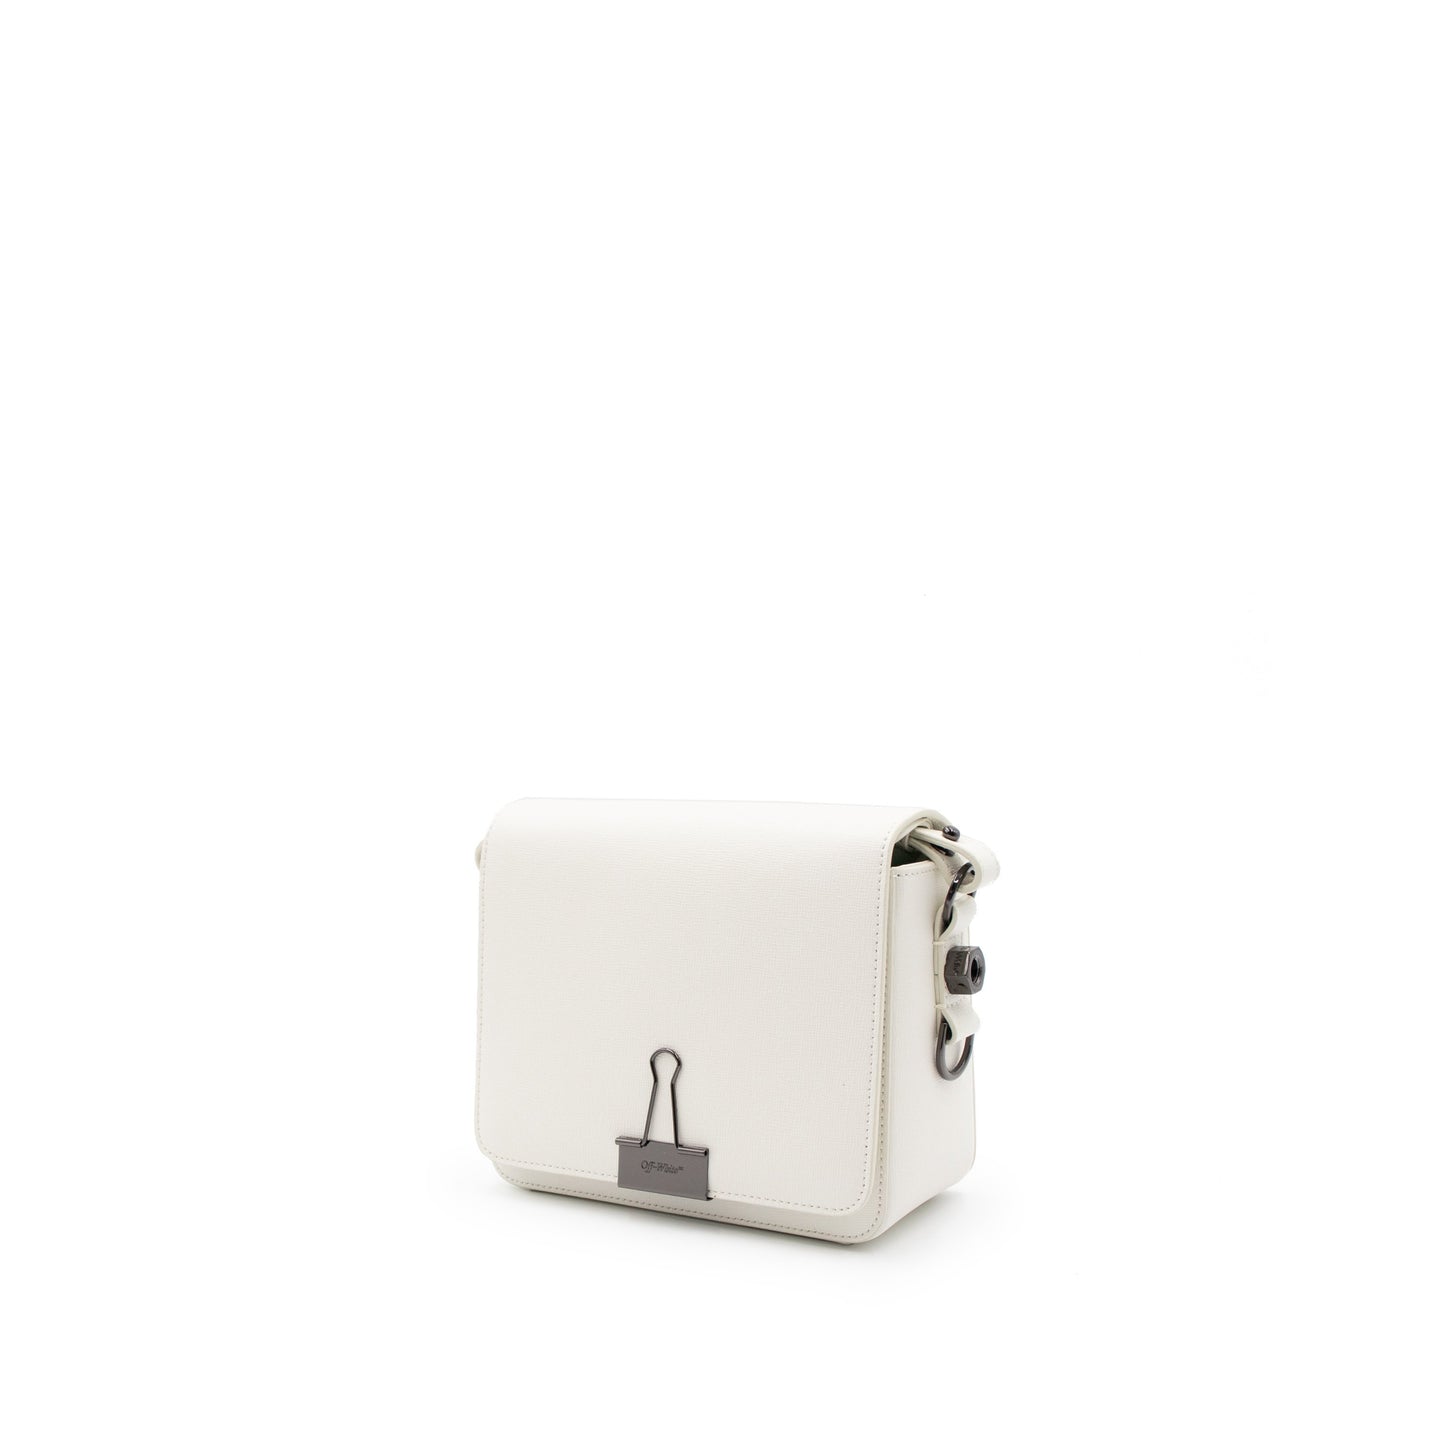 Small White Flap Bag With Yellow Belt in White